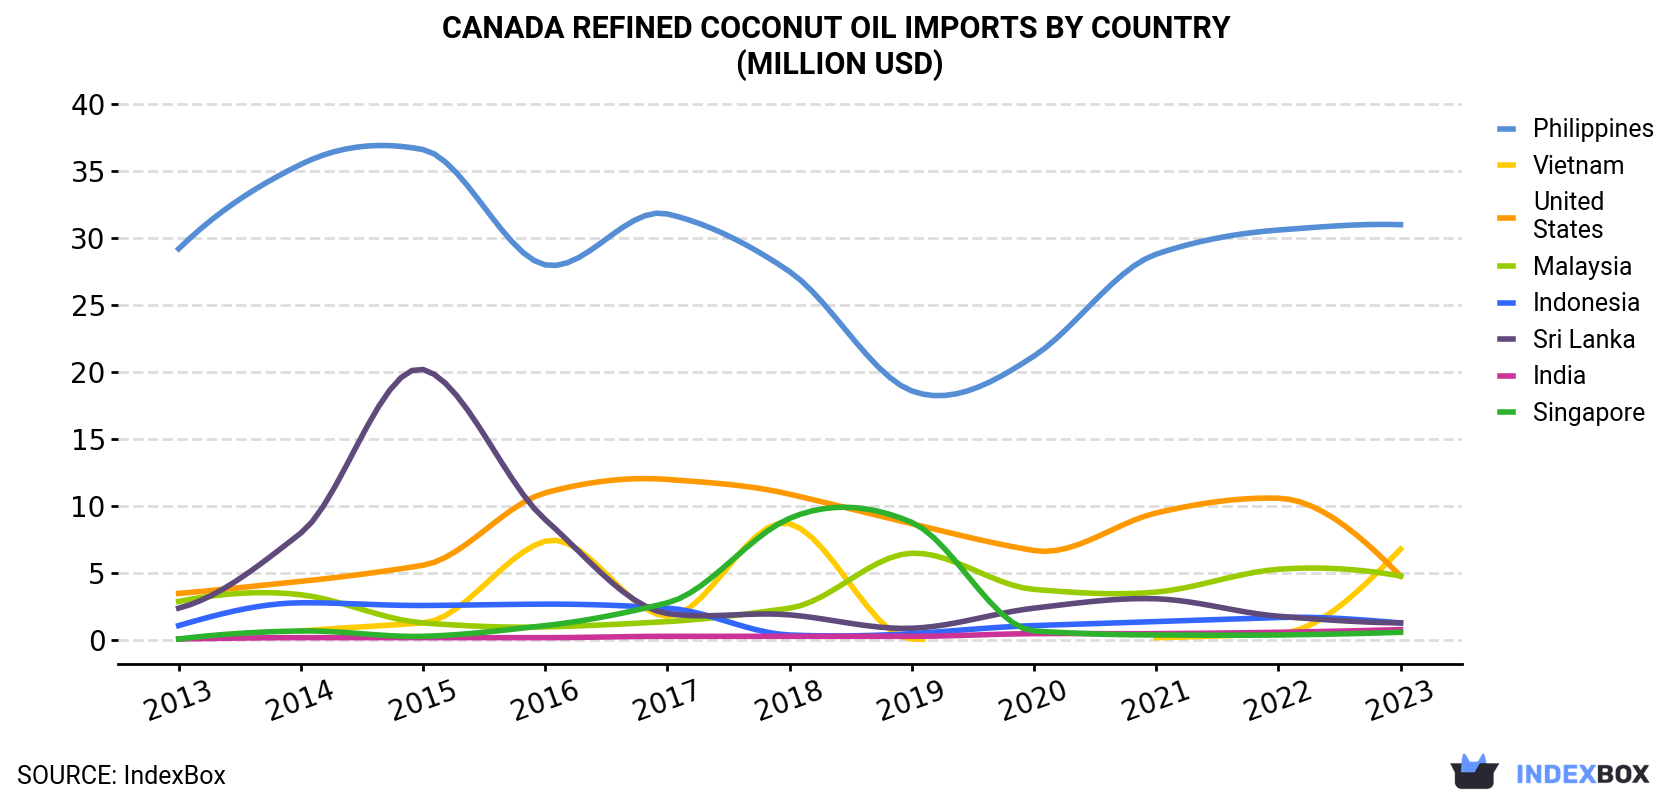 Canada Refined Coconut Oil Imports By Country (Million USD)